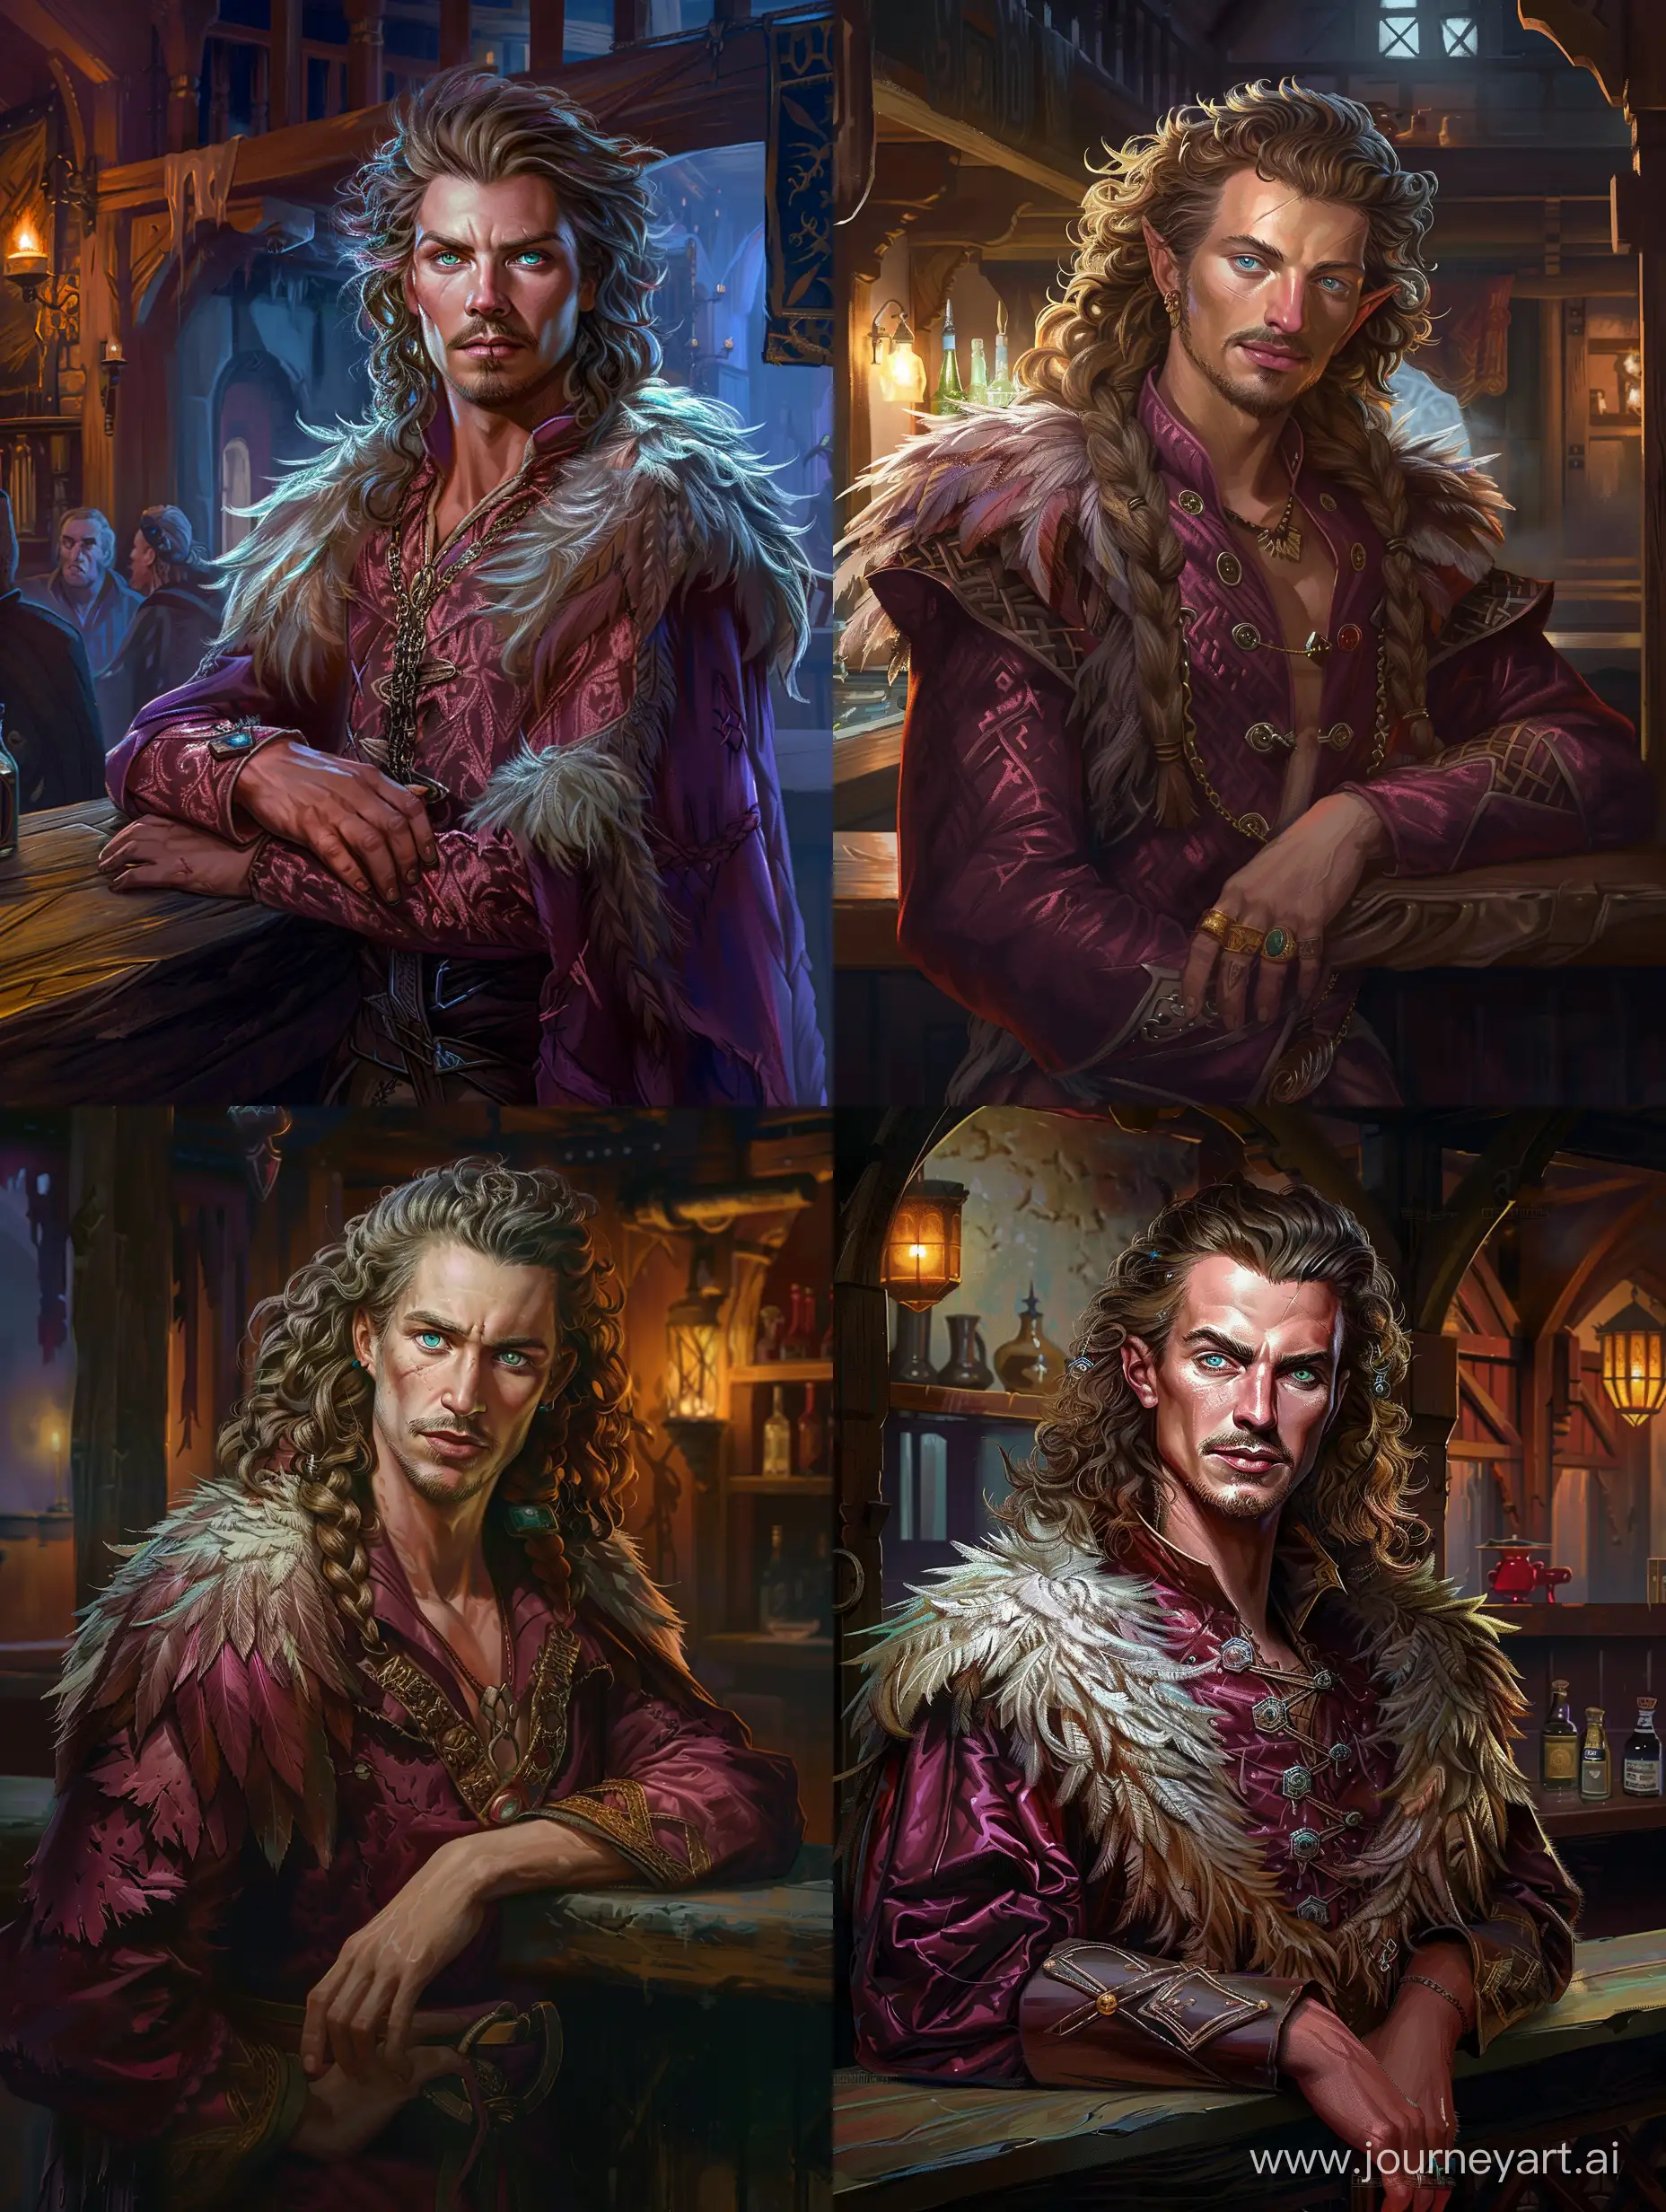 Sarcastic-Human-Male-Sorcerer-in-Tevinter-Mage-Robes-Tavern-Night-Portrait